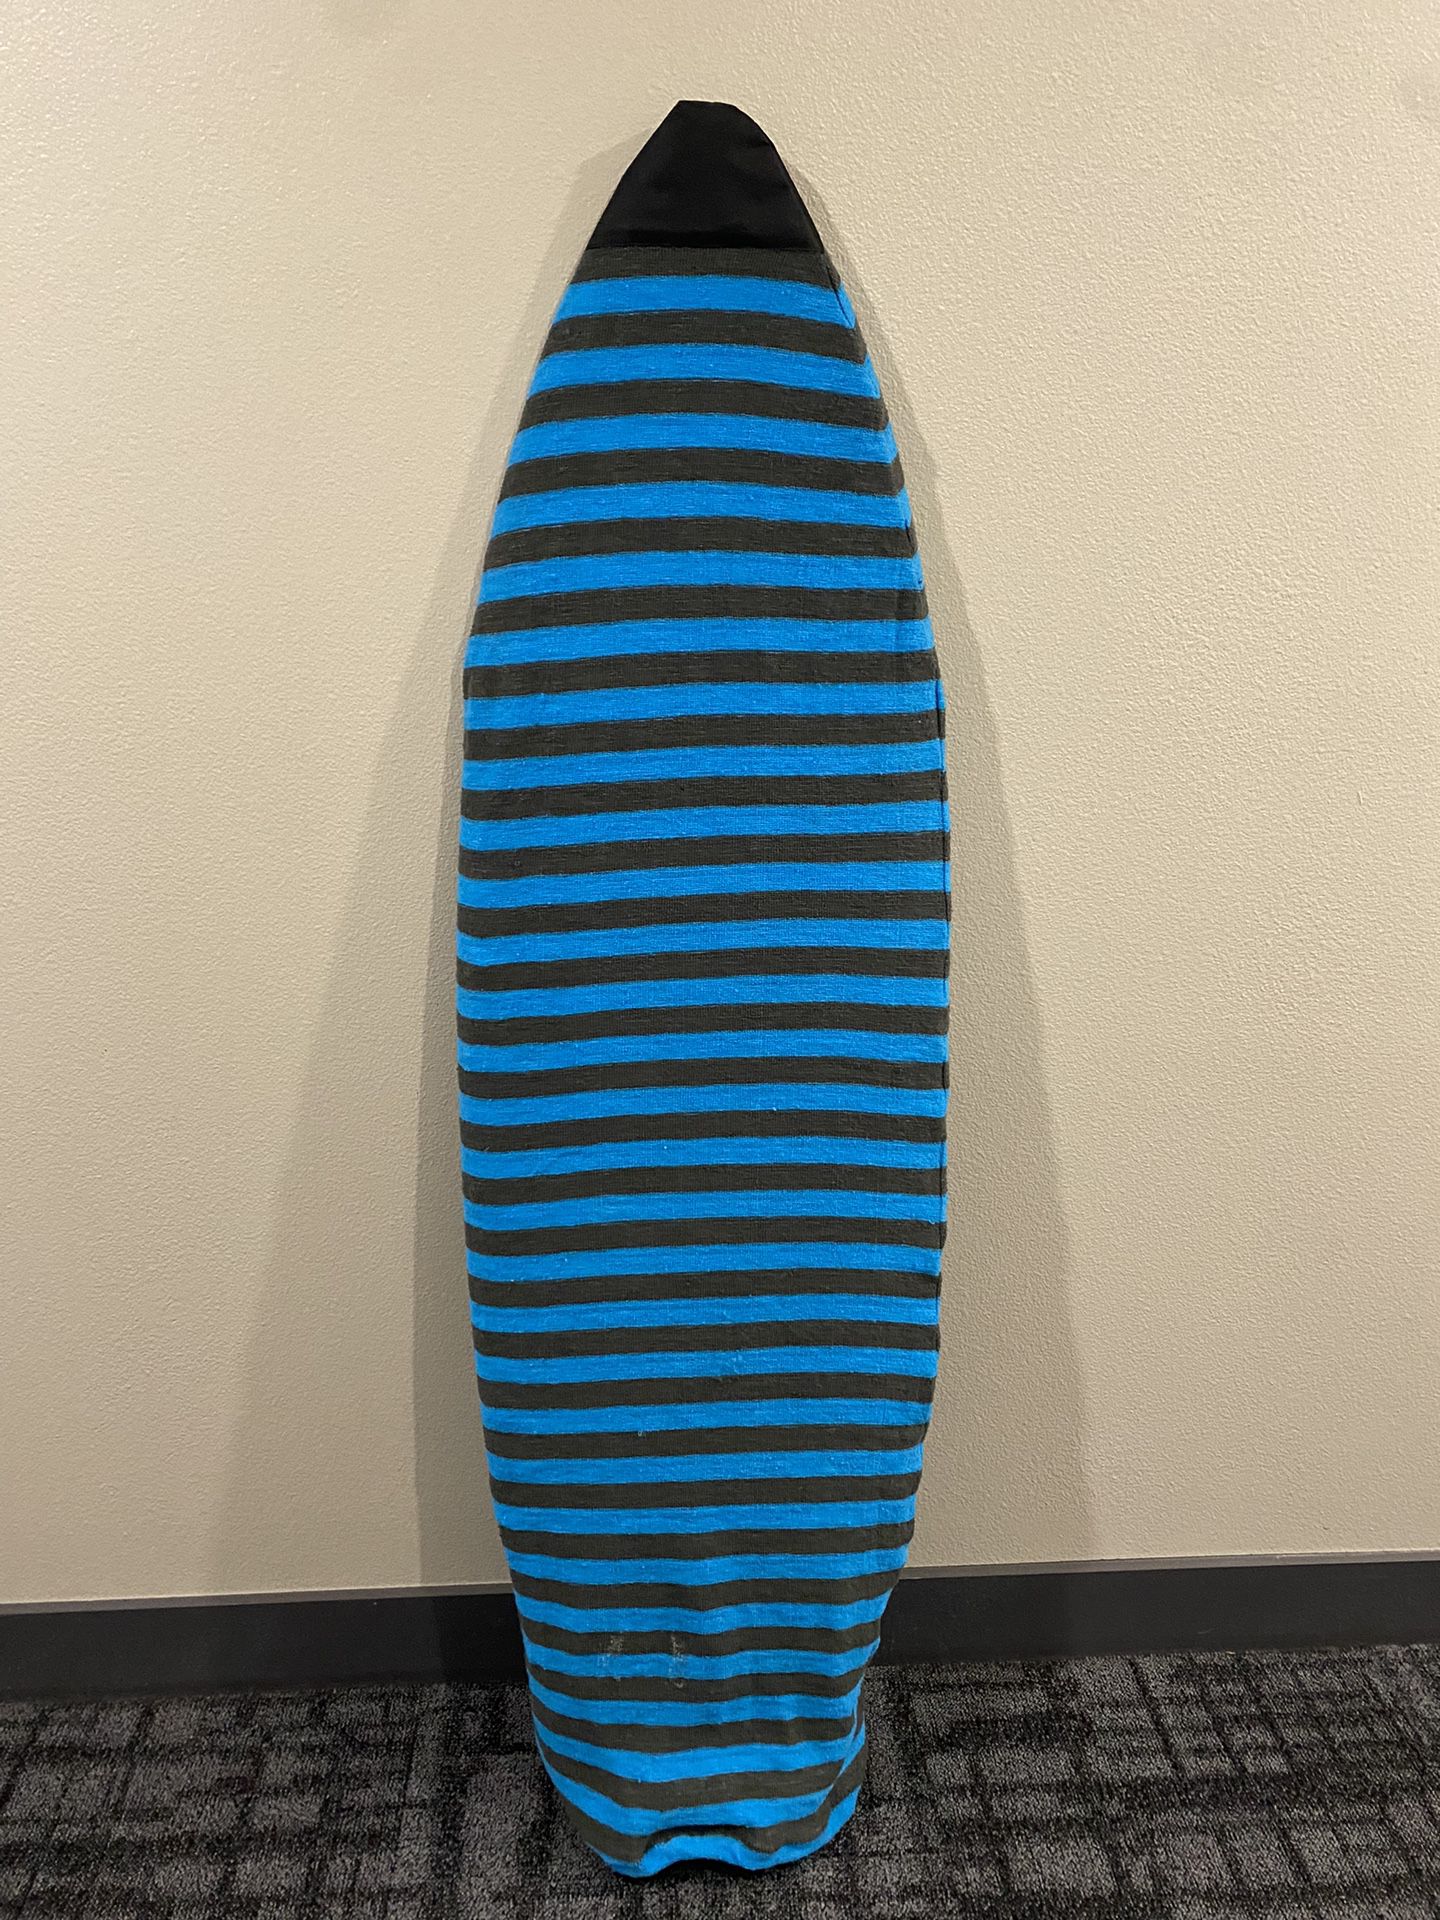 5'10 FireWire Mashup Surfboard for Sale in South San Francisco, CA